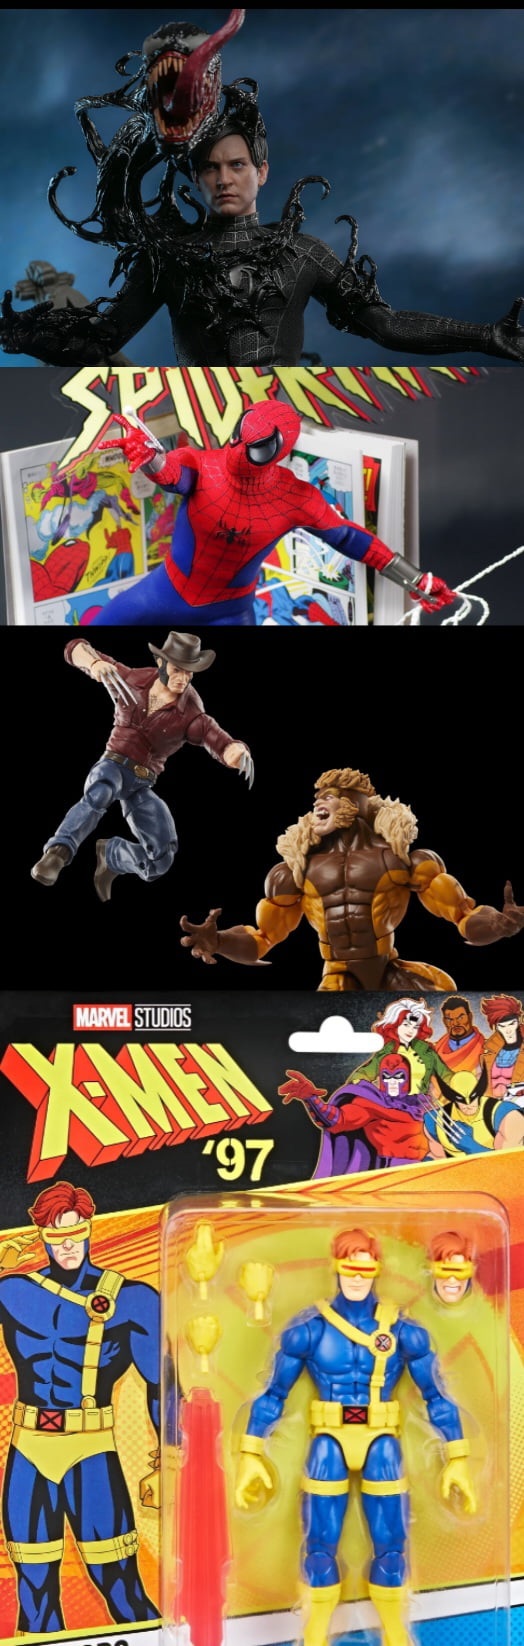 Current MCU is doing so well... the toy line-up surely must 